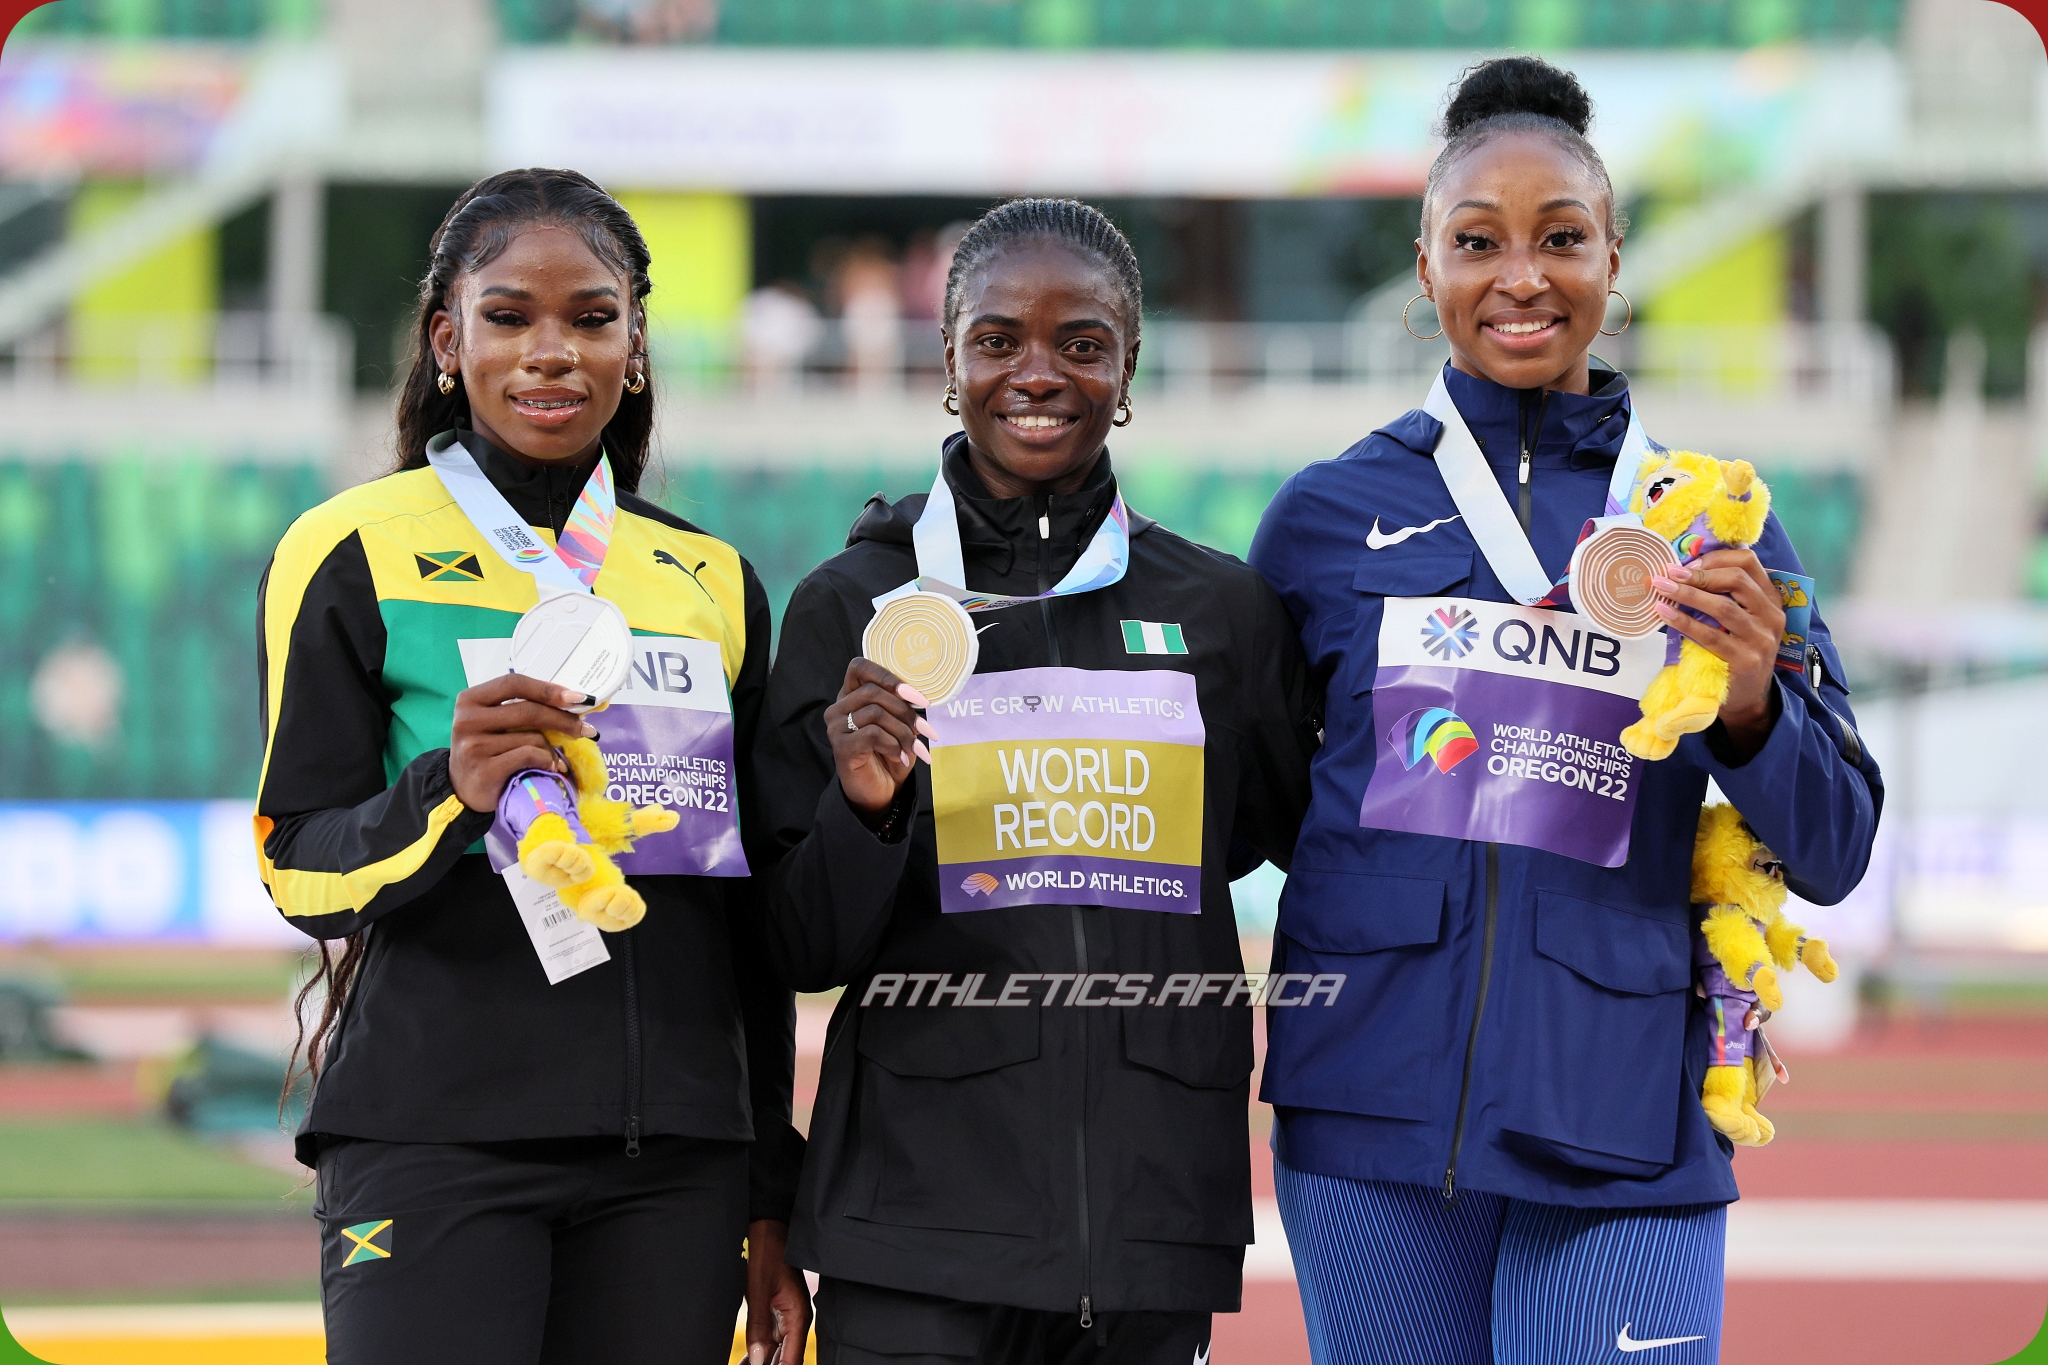 Silver medalist Britany Anderson of Team Jamaica, gold medalist Tobi Amusan of Team Nigeria, and bronze medalist Jasmine Camacho-Quinn of Team Puerto Rico pose during the medal ceremony for the Women's 100m Hurdles on day ten of the World Athletics Championships Oregon22 at Hayward Field on July 24, 2022 in Eugene, Oregon. (Photo by Andy Lyons/Getty Images for World Athletics)